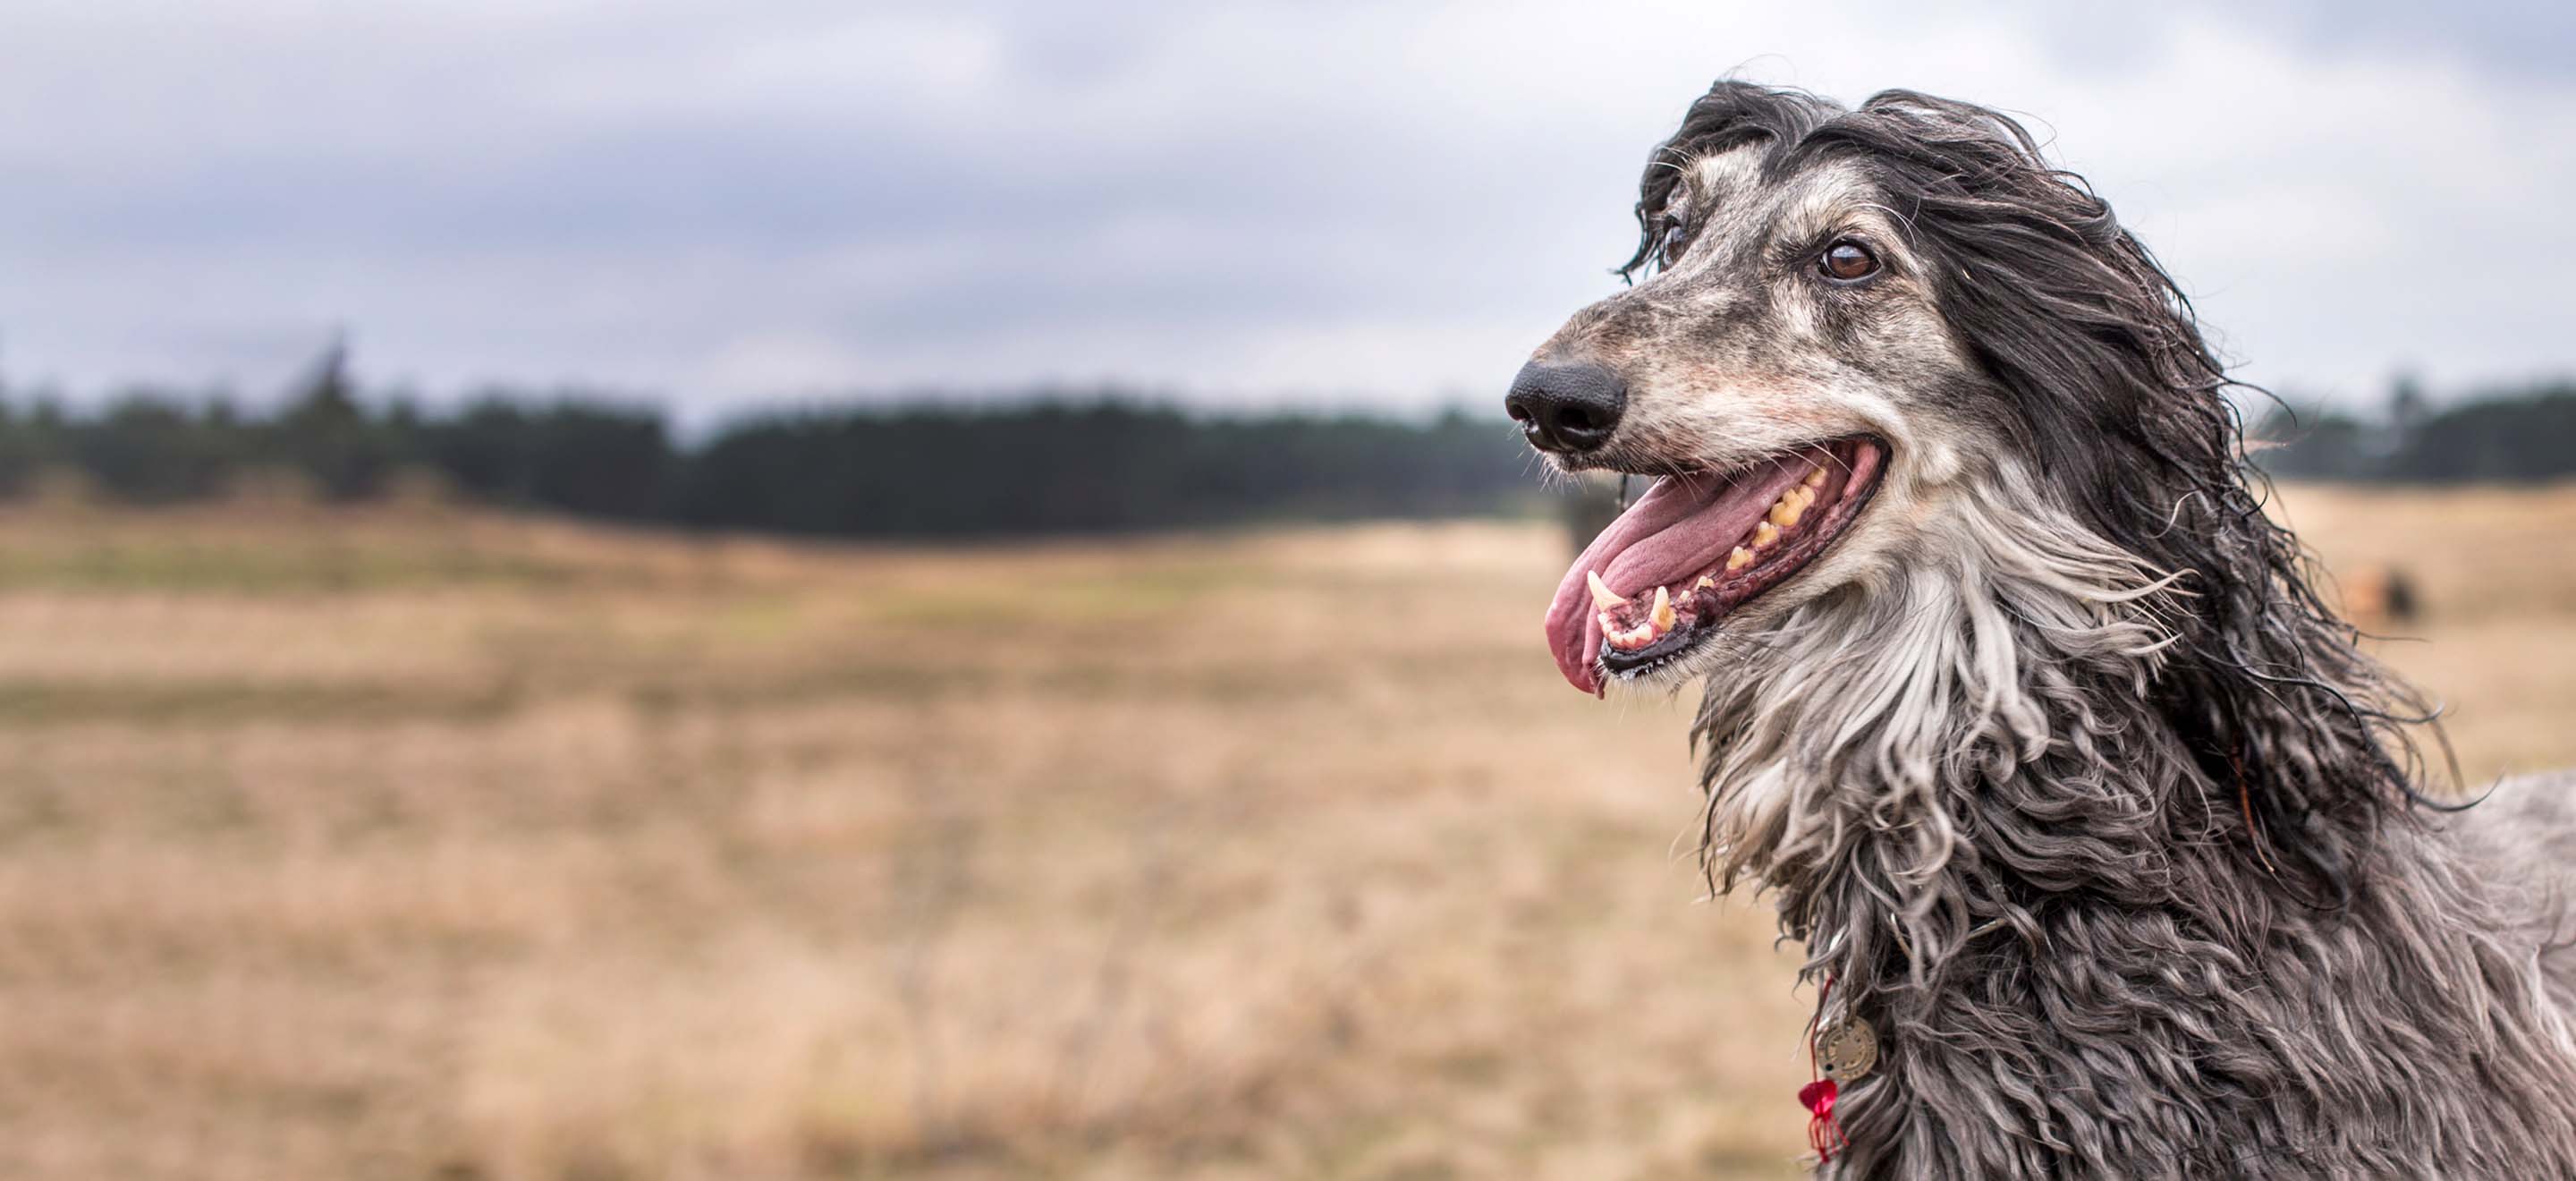 A white and gray Afghan Hound dog smiling in a prairie field image